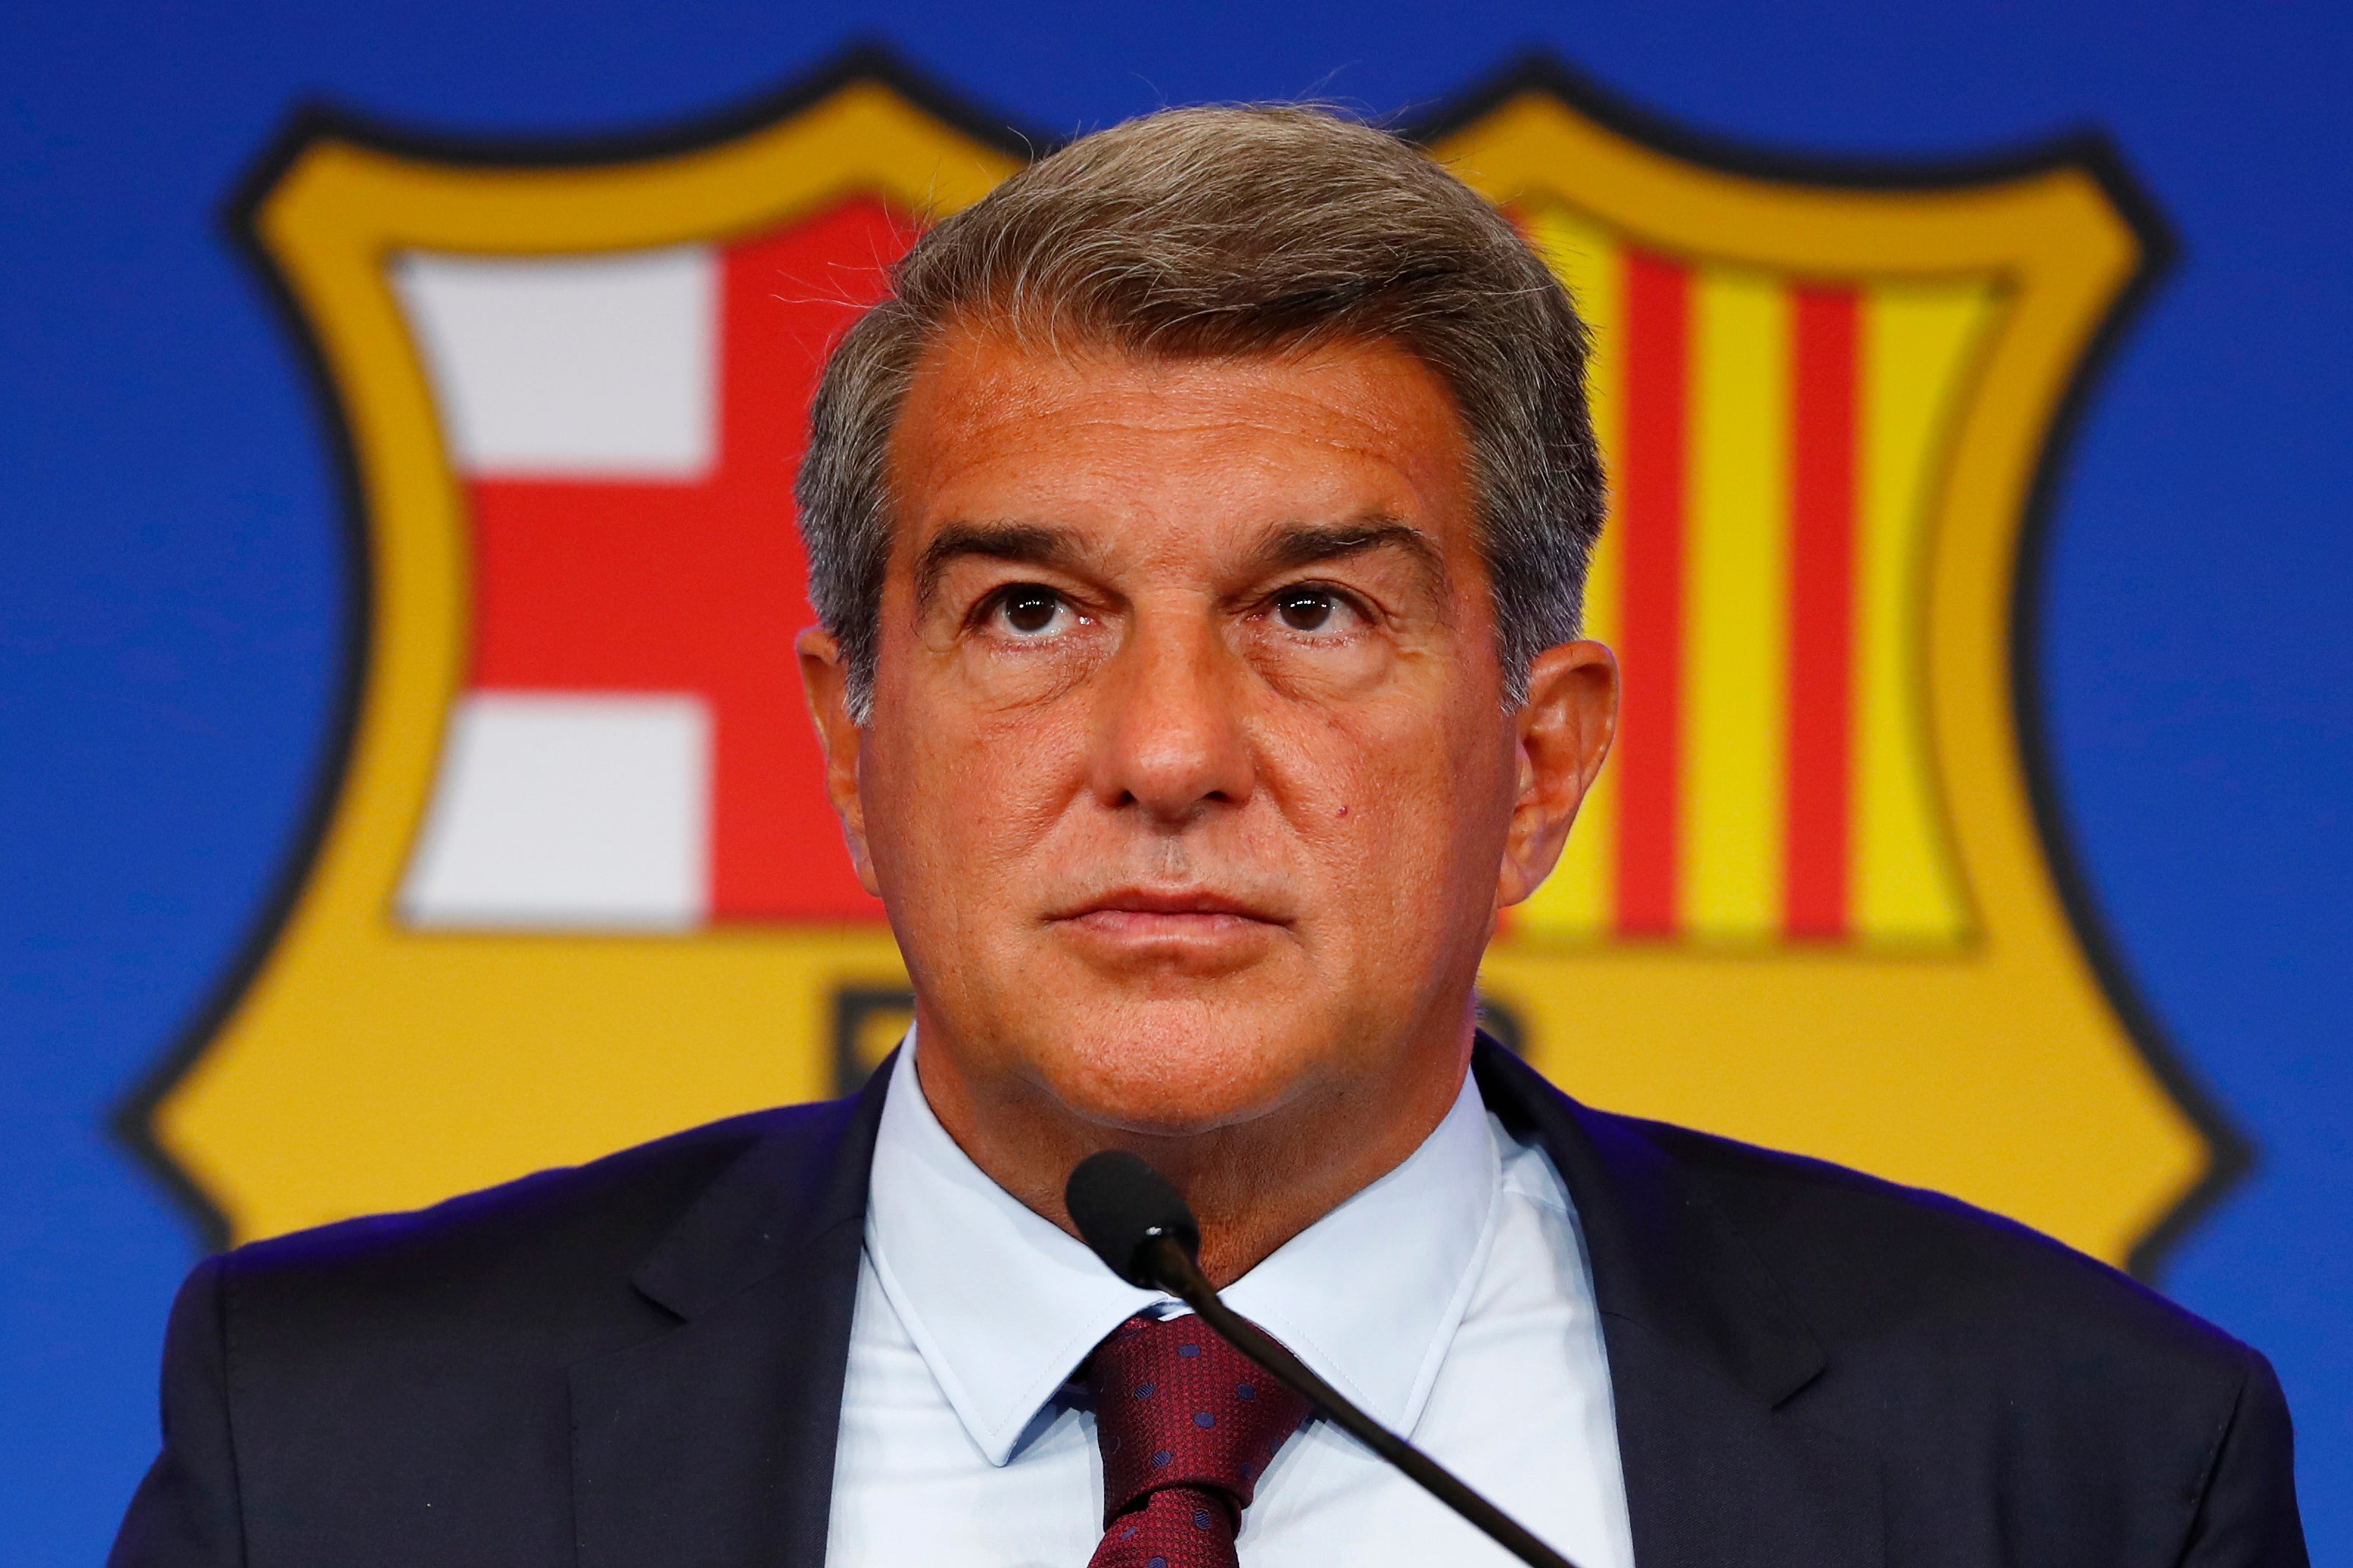 Joan Laporta is under formal investigation for suspected bribery